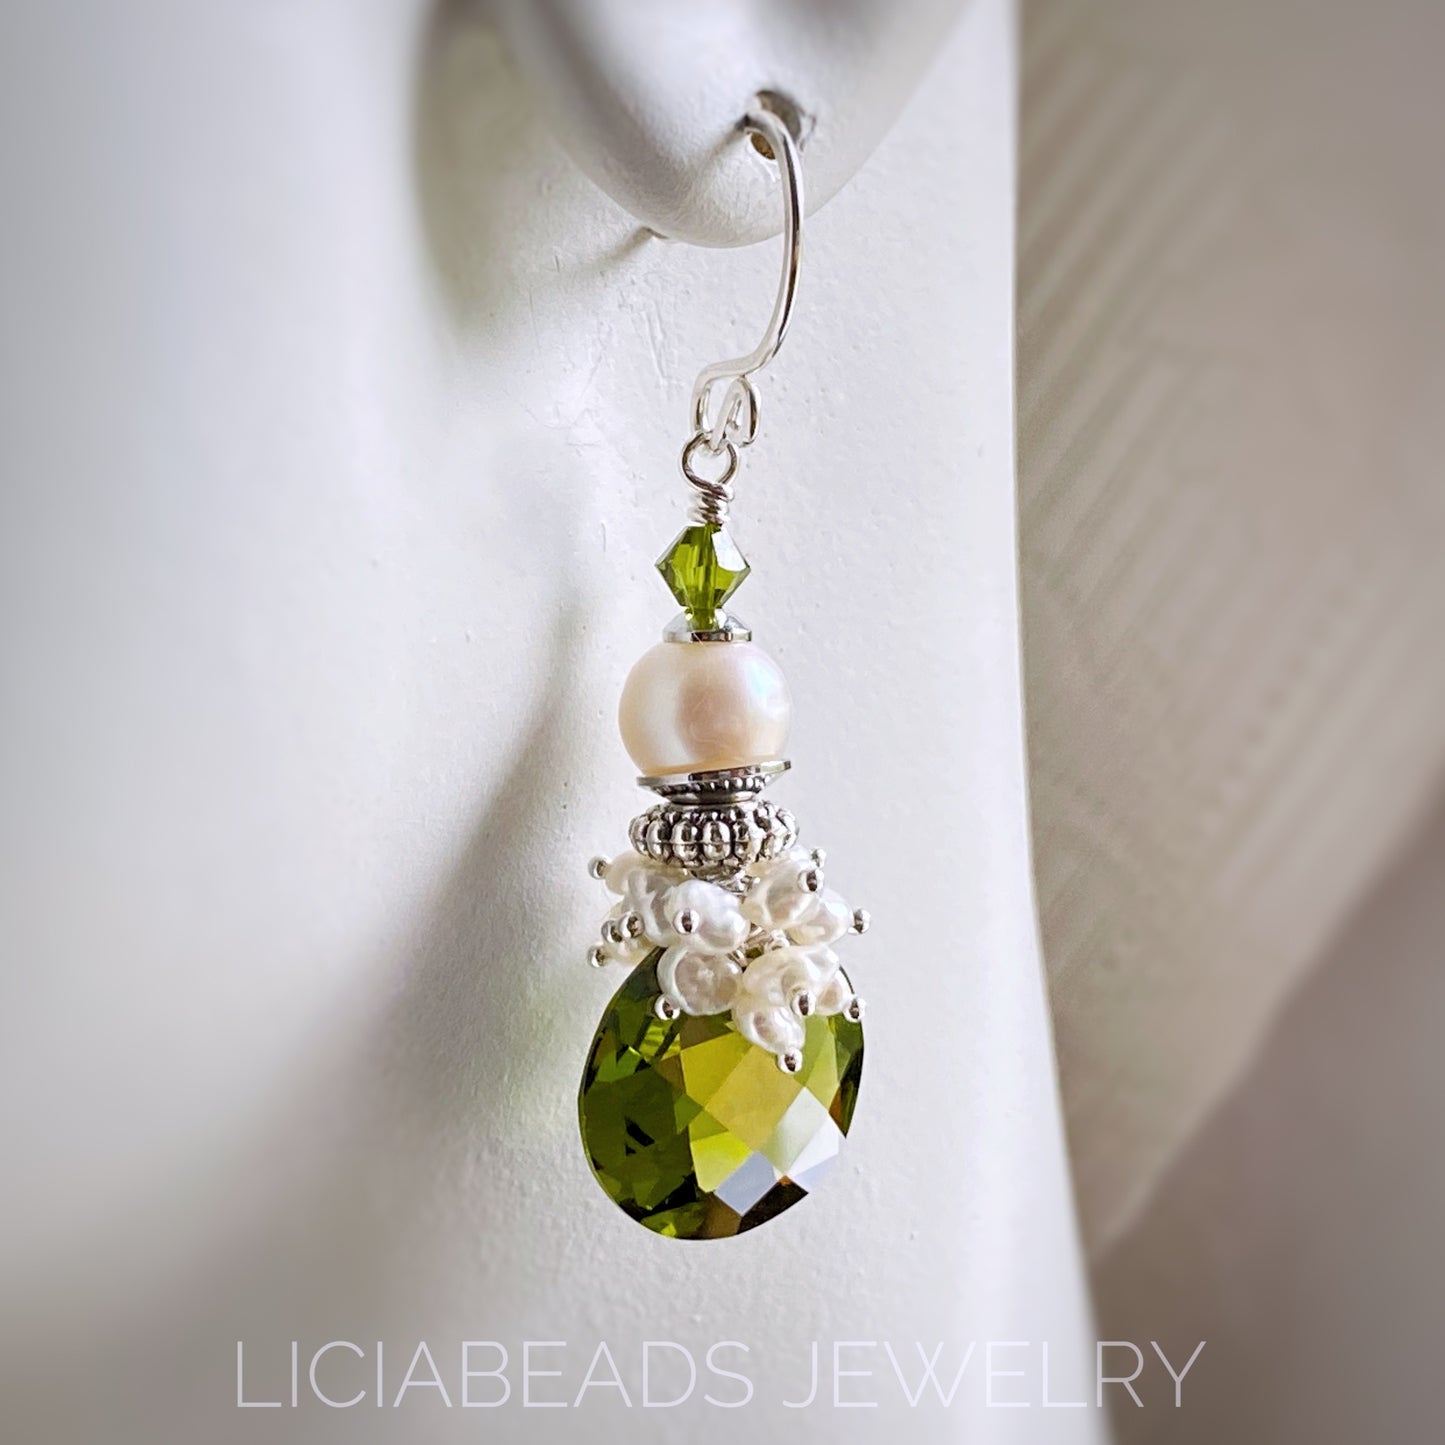 Manhattan Olive, green cubic zirconia and freshwater pearls